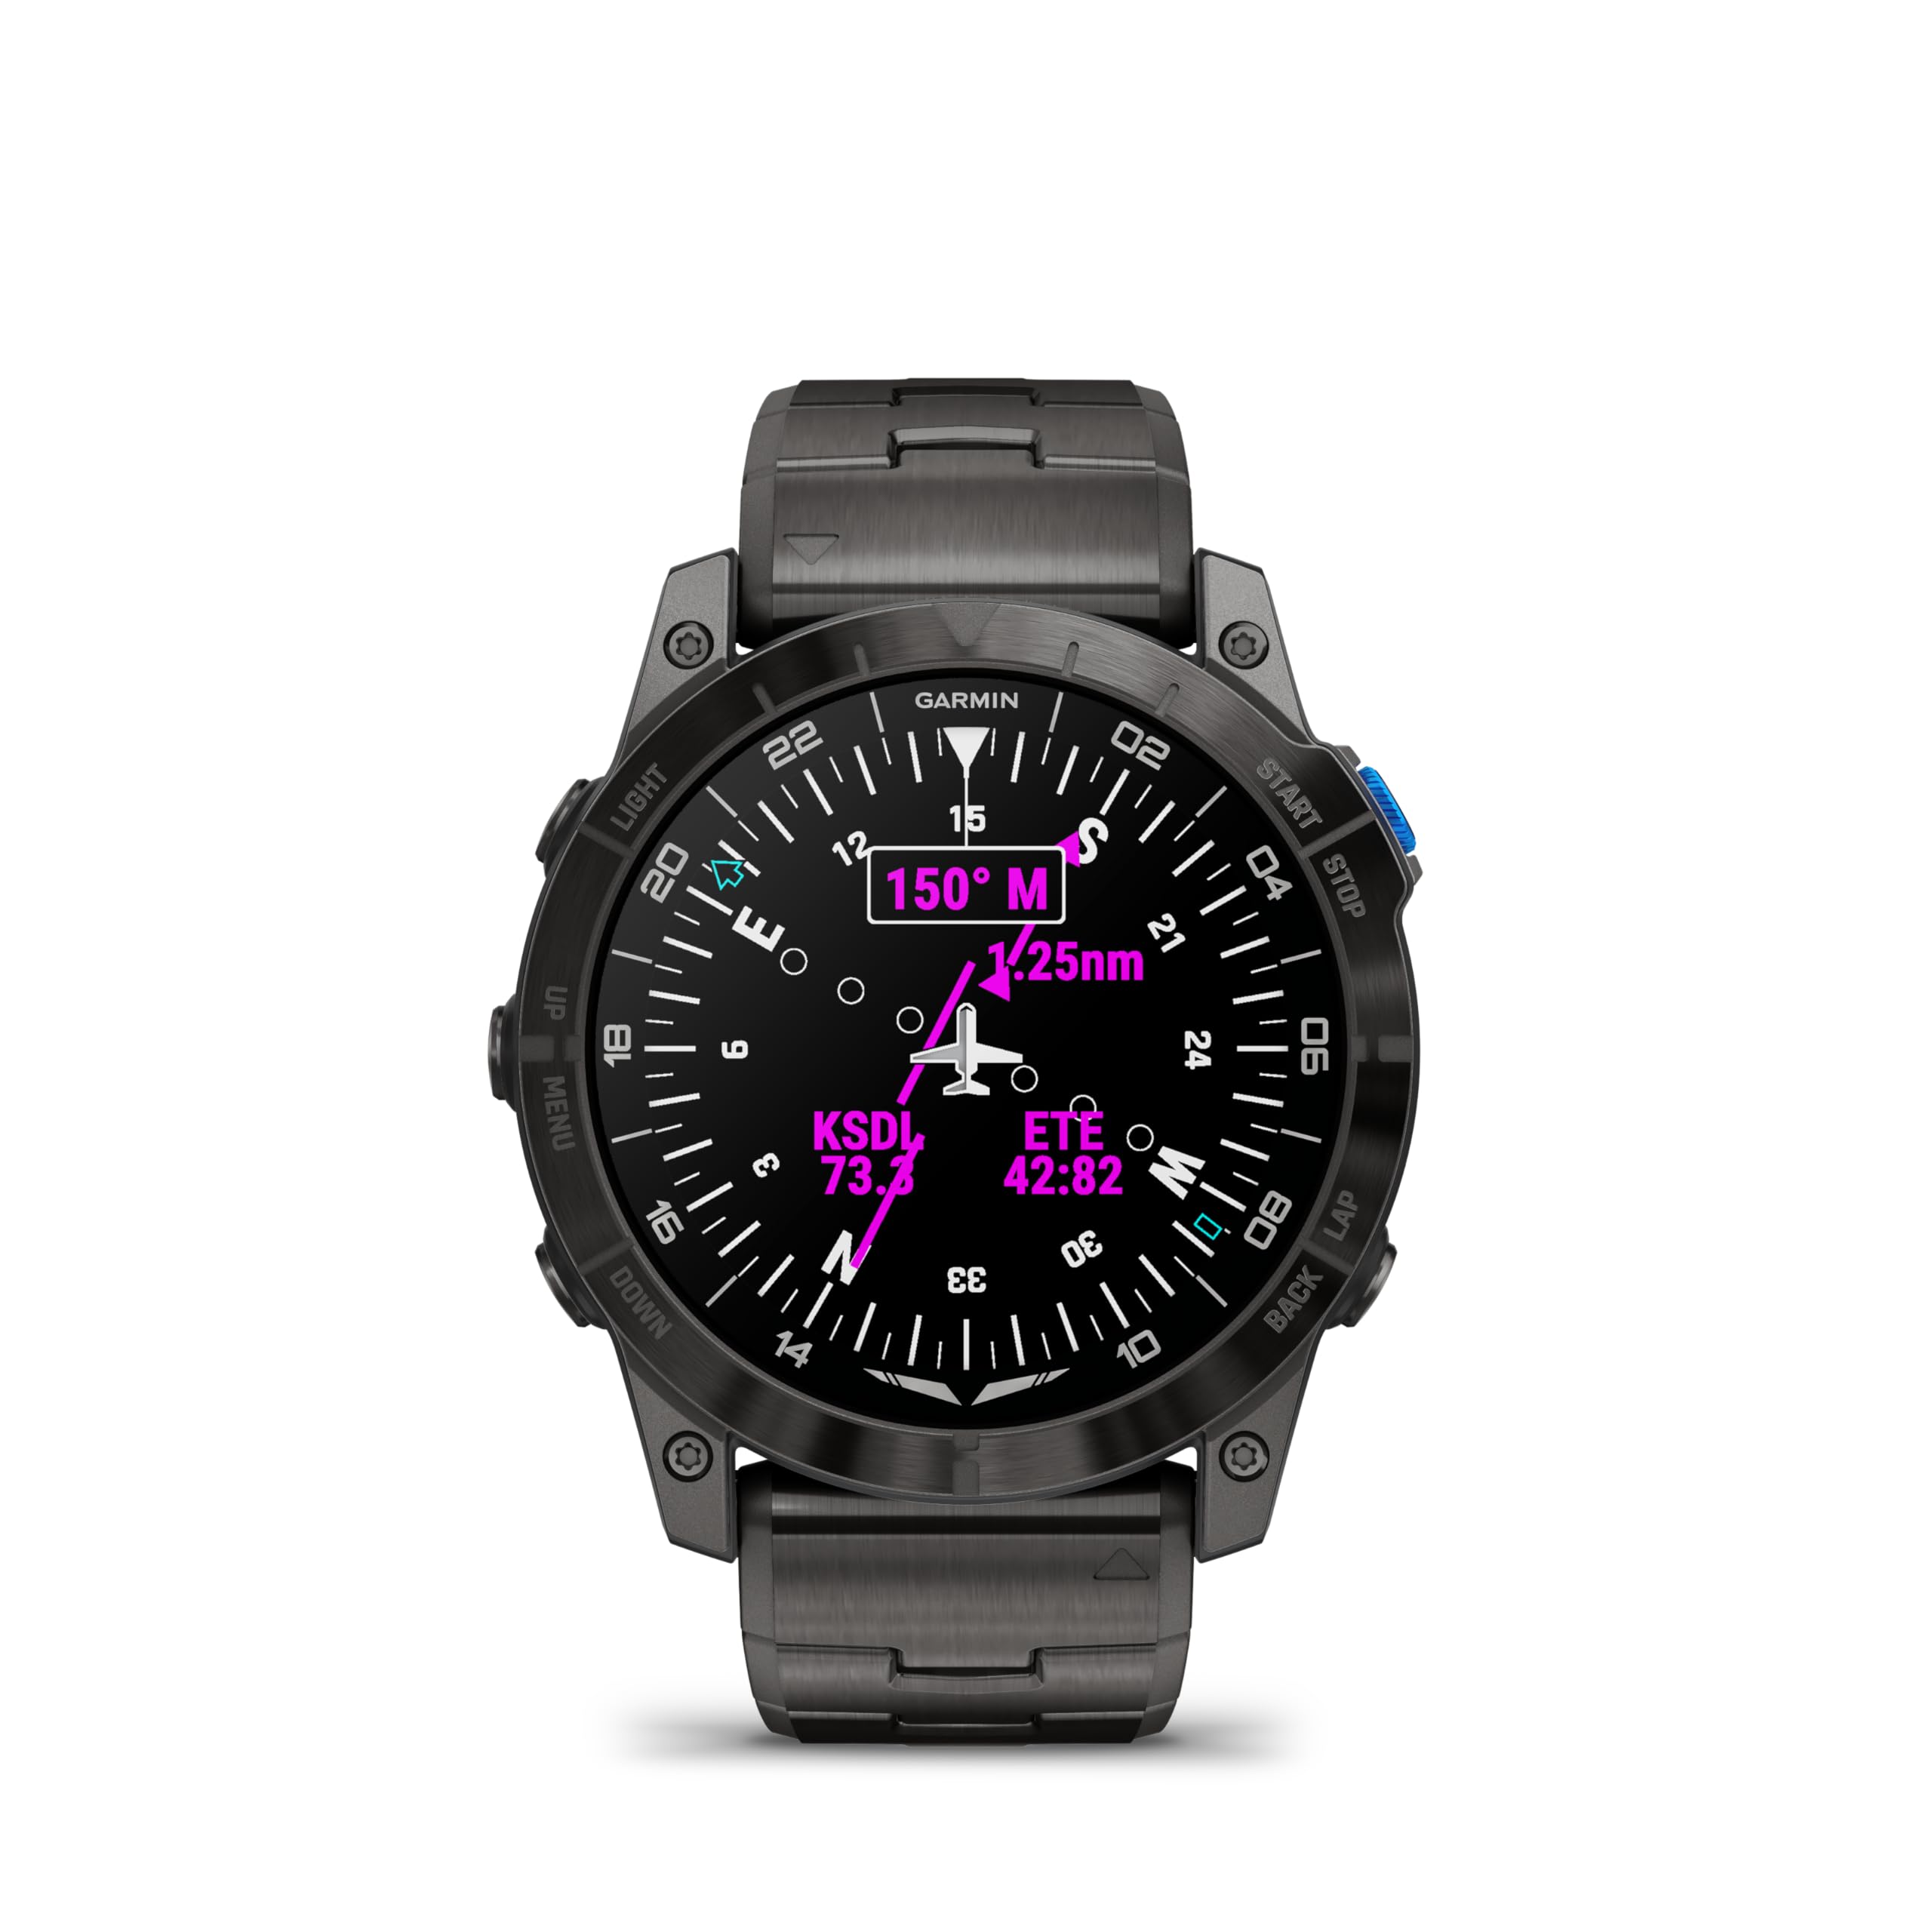 Garmin D2™ Mach 1 Pro, Aviator Smartwatch with GPS Moving Map, Aviation Weather, Health and Wellness Features, AMOLED Display, and Built-in Flashlight